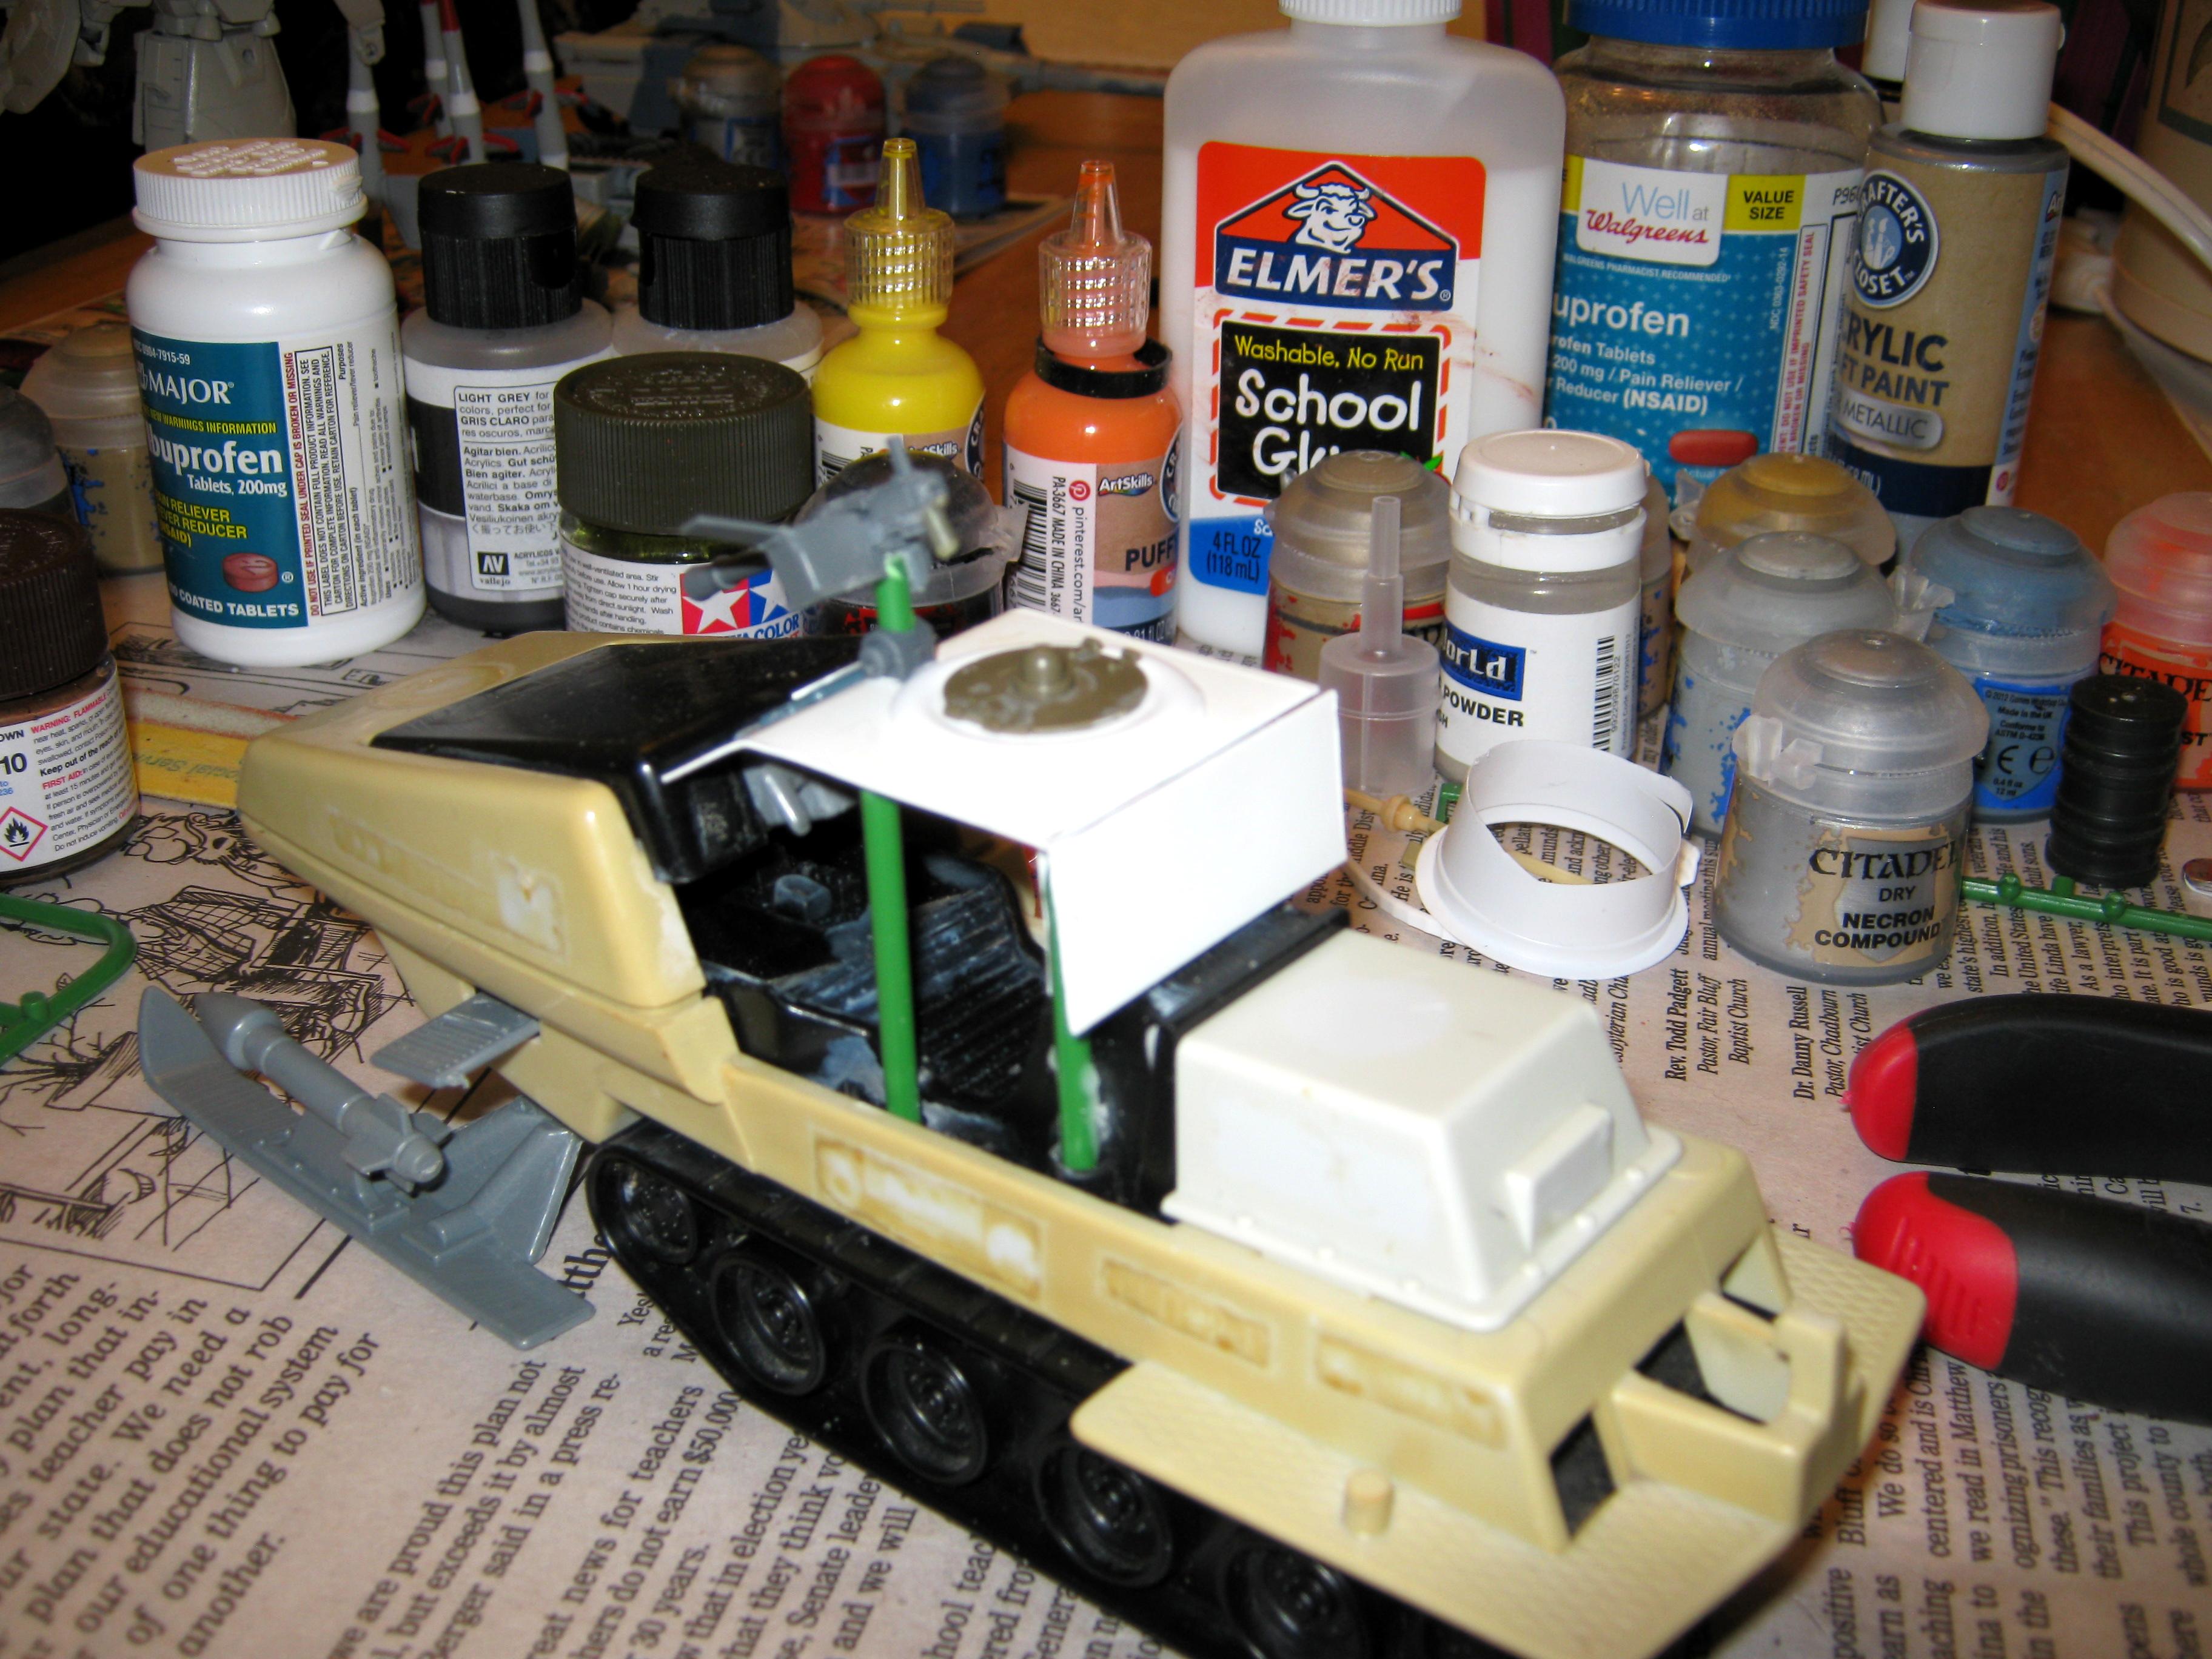 Afv, Armored Fighting Vehicle, Atv, Command Vehicle, Commissar Tank, Conversion, Fast Attack, G.i. Joe, Imperial, Polar Battle Bear, Recon Vehicle, Scout Vehicle, Ski-doo, Skimobile, Snowmobile, Toy